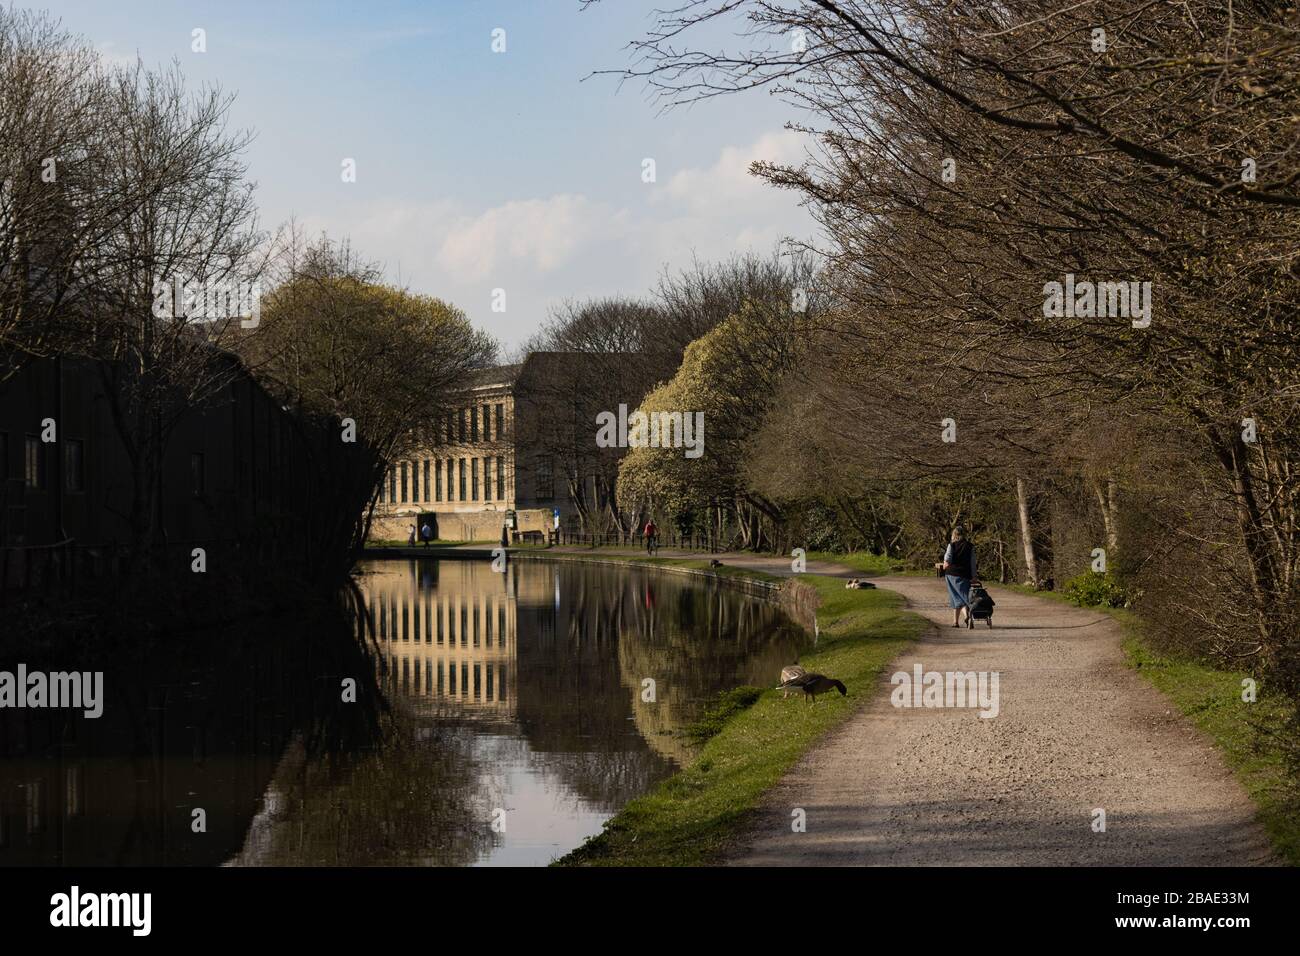 SALTAIRE, ENGLAND - 25/3/2020 - A solitary elderly lady walks along the canal from Shipley towards New Mill seen on the horizon with a shopping bag Stock Photo